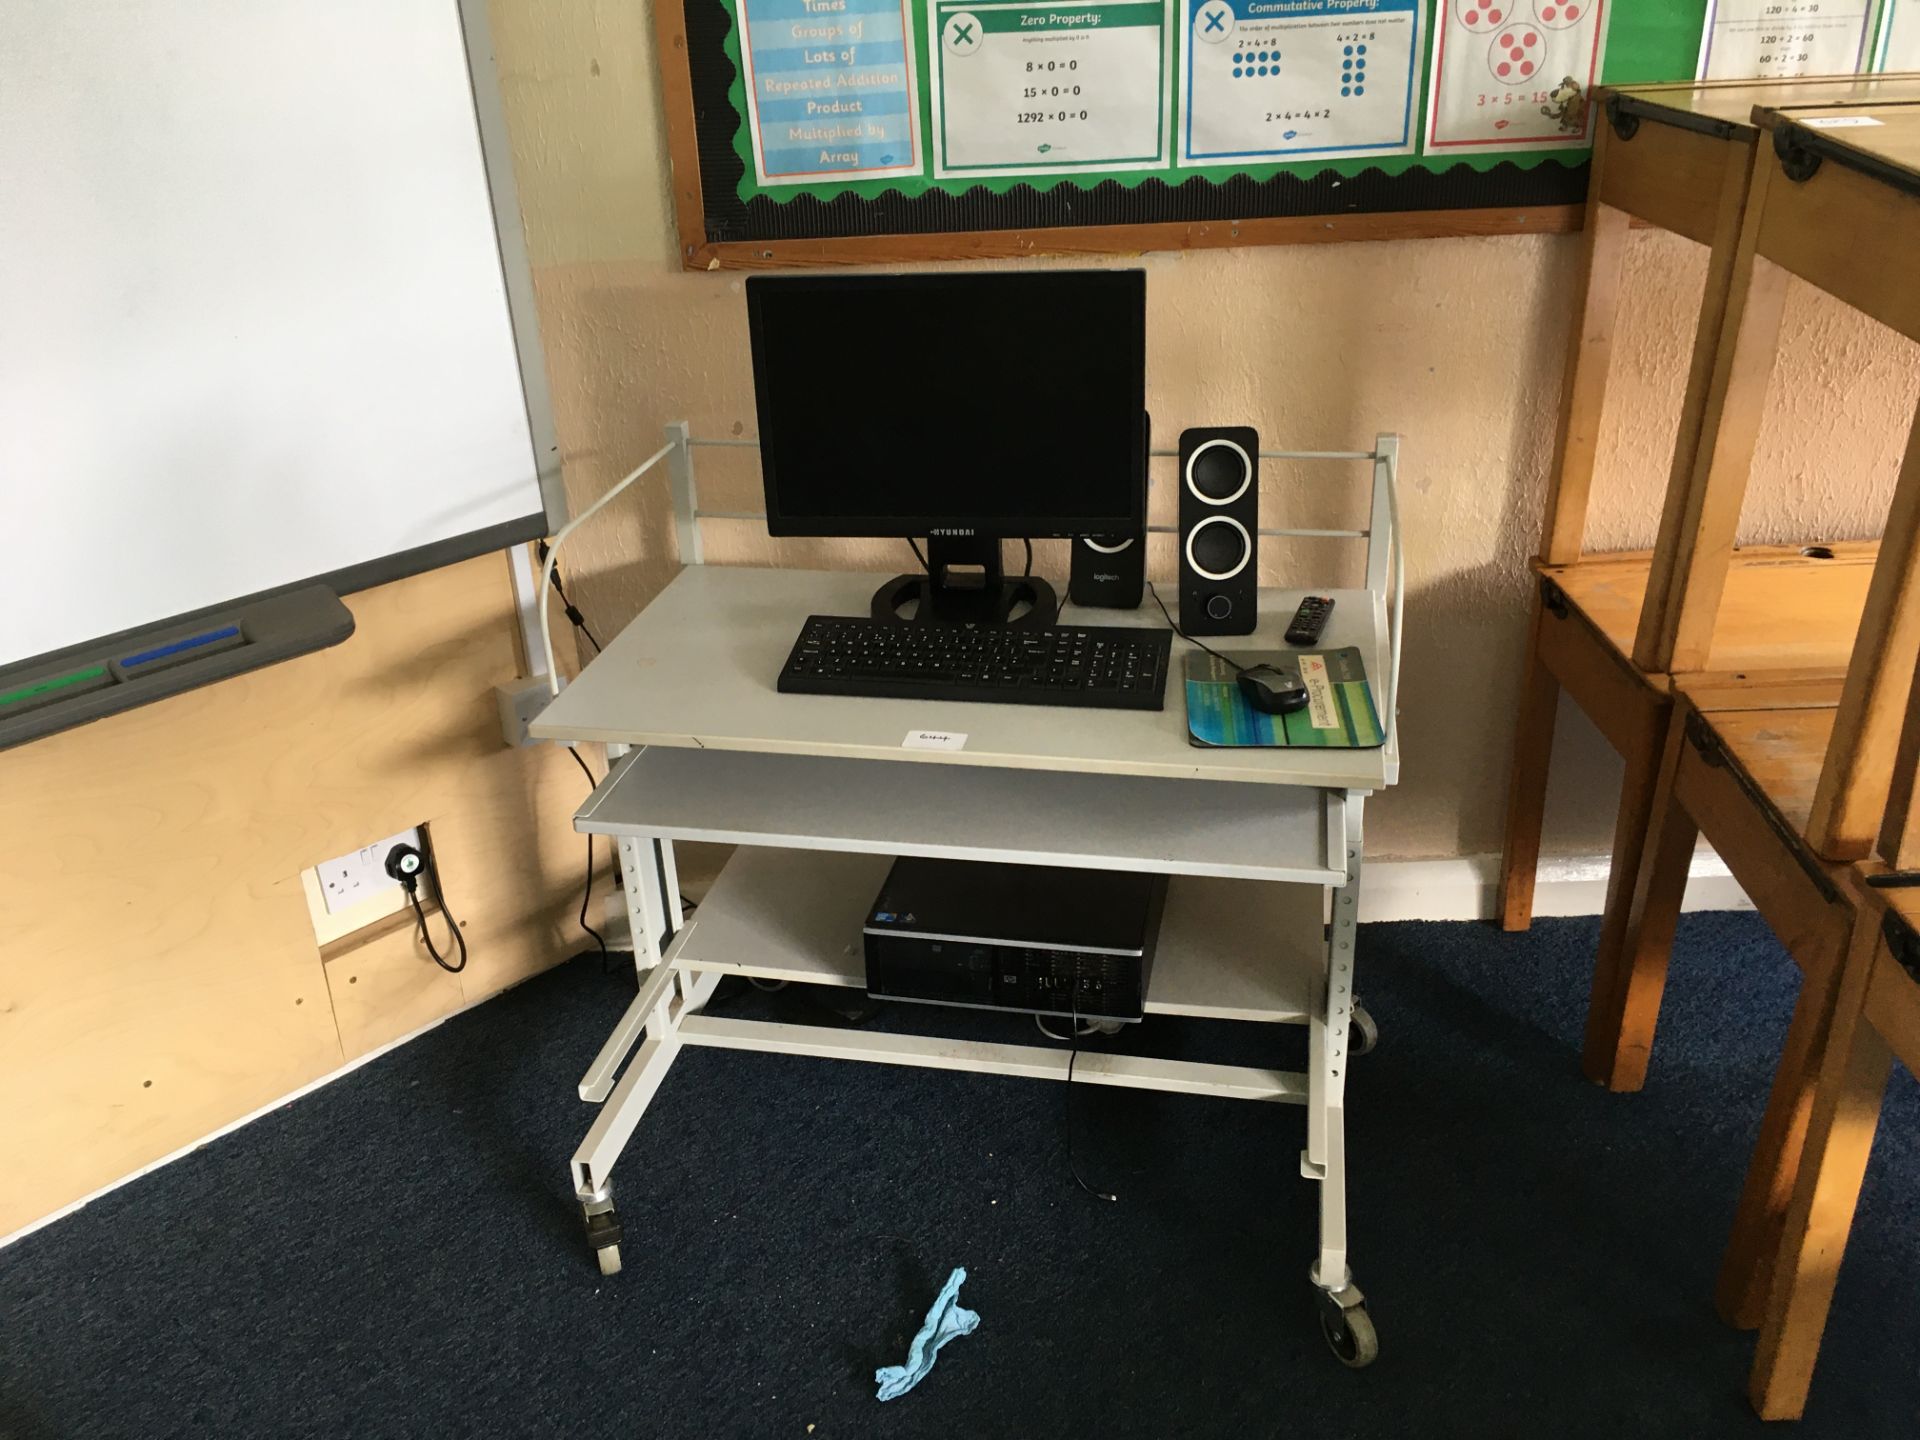 Computer trolley (PC NOT included)